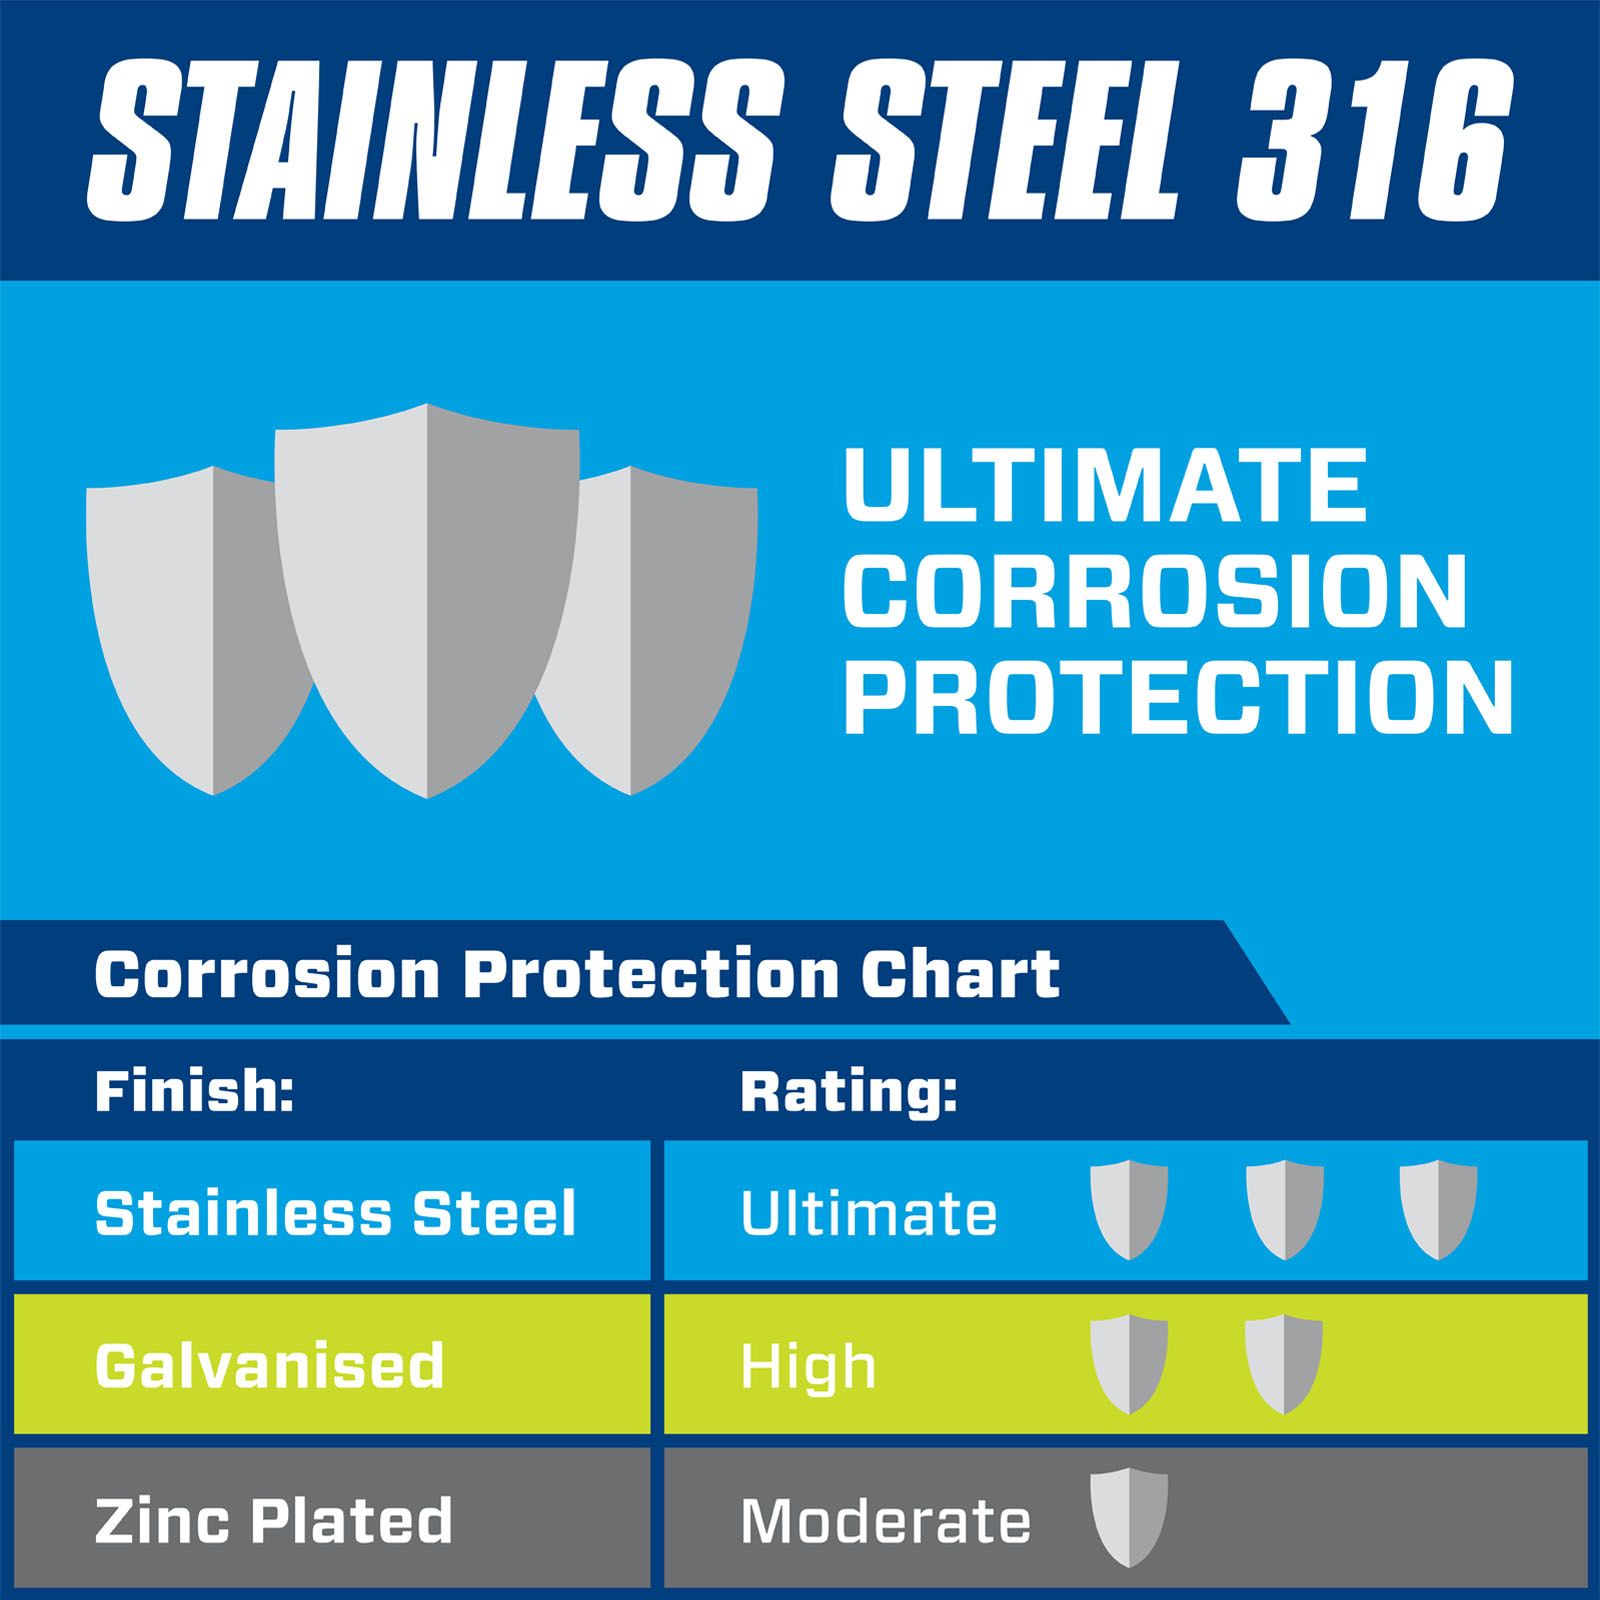 CorrosionProtectionChart Stainless20Steel img